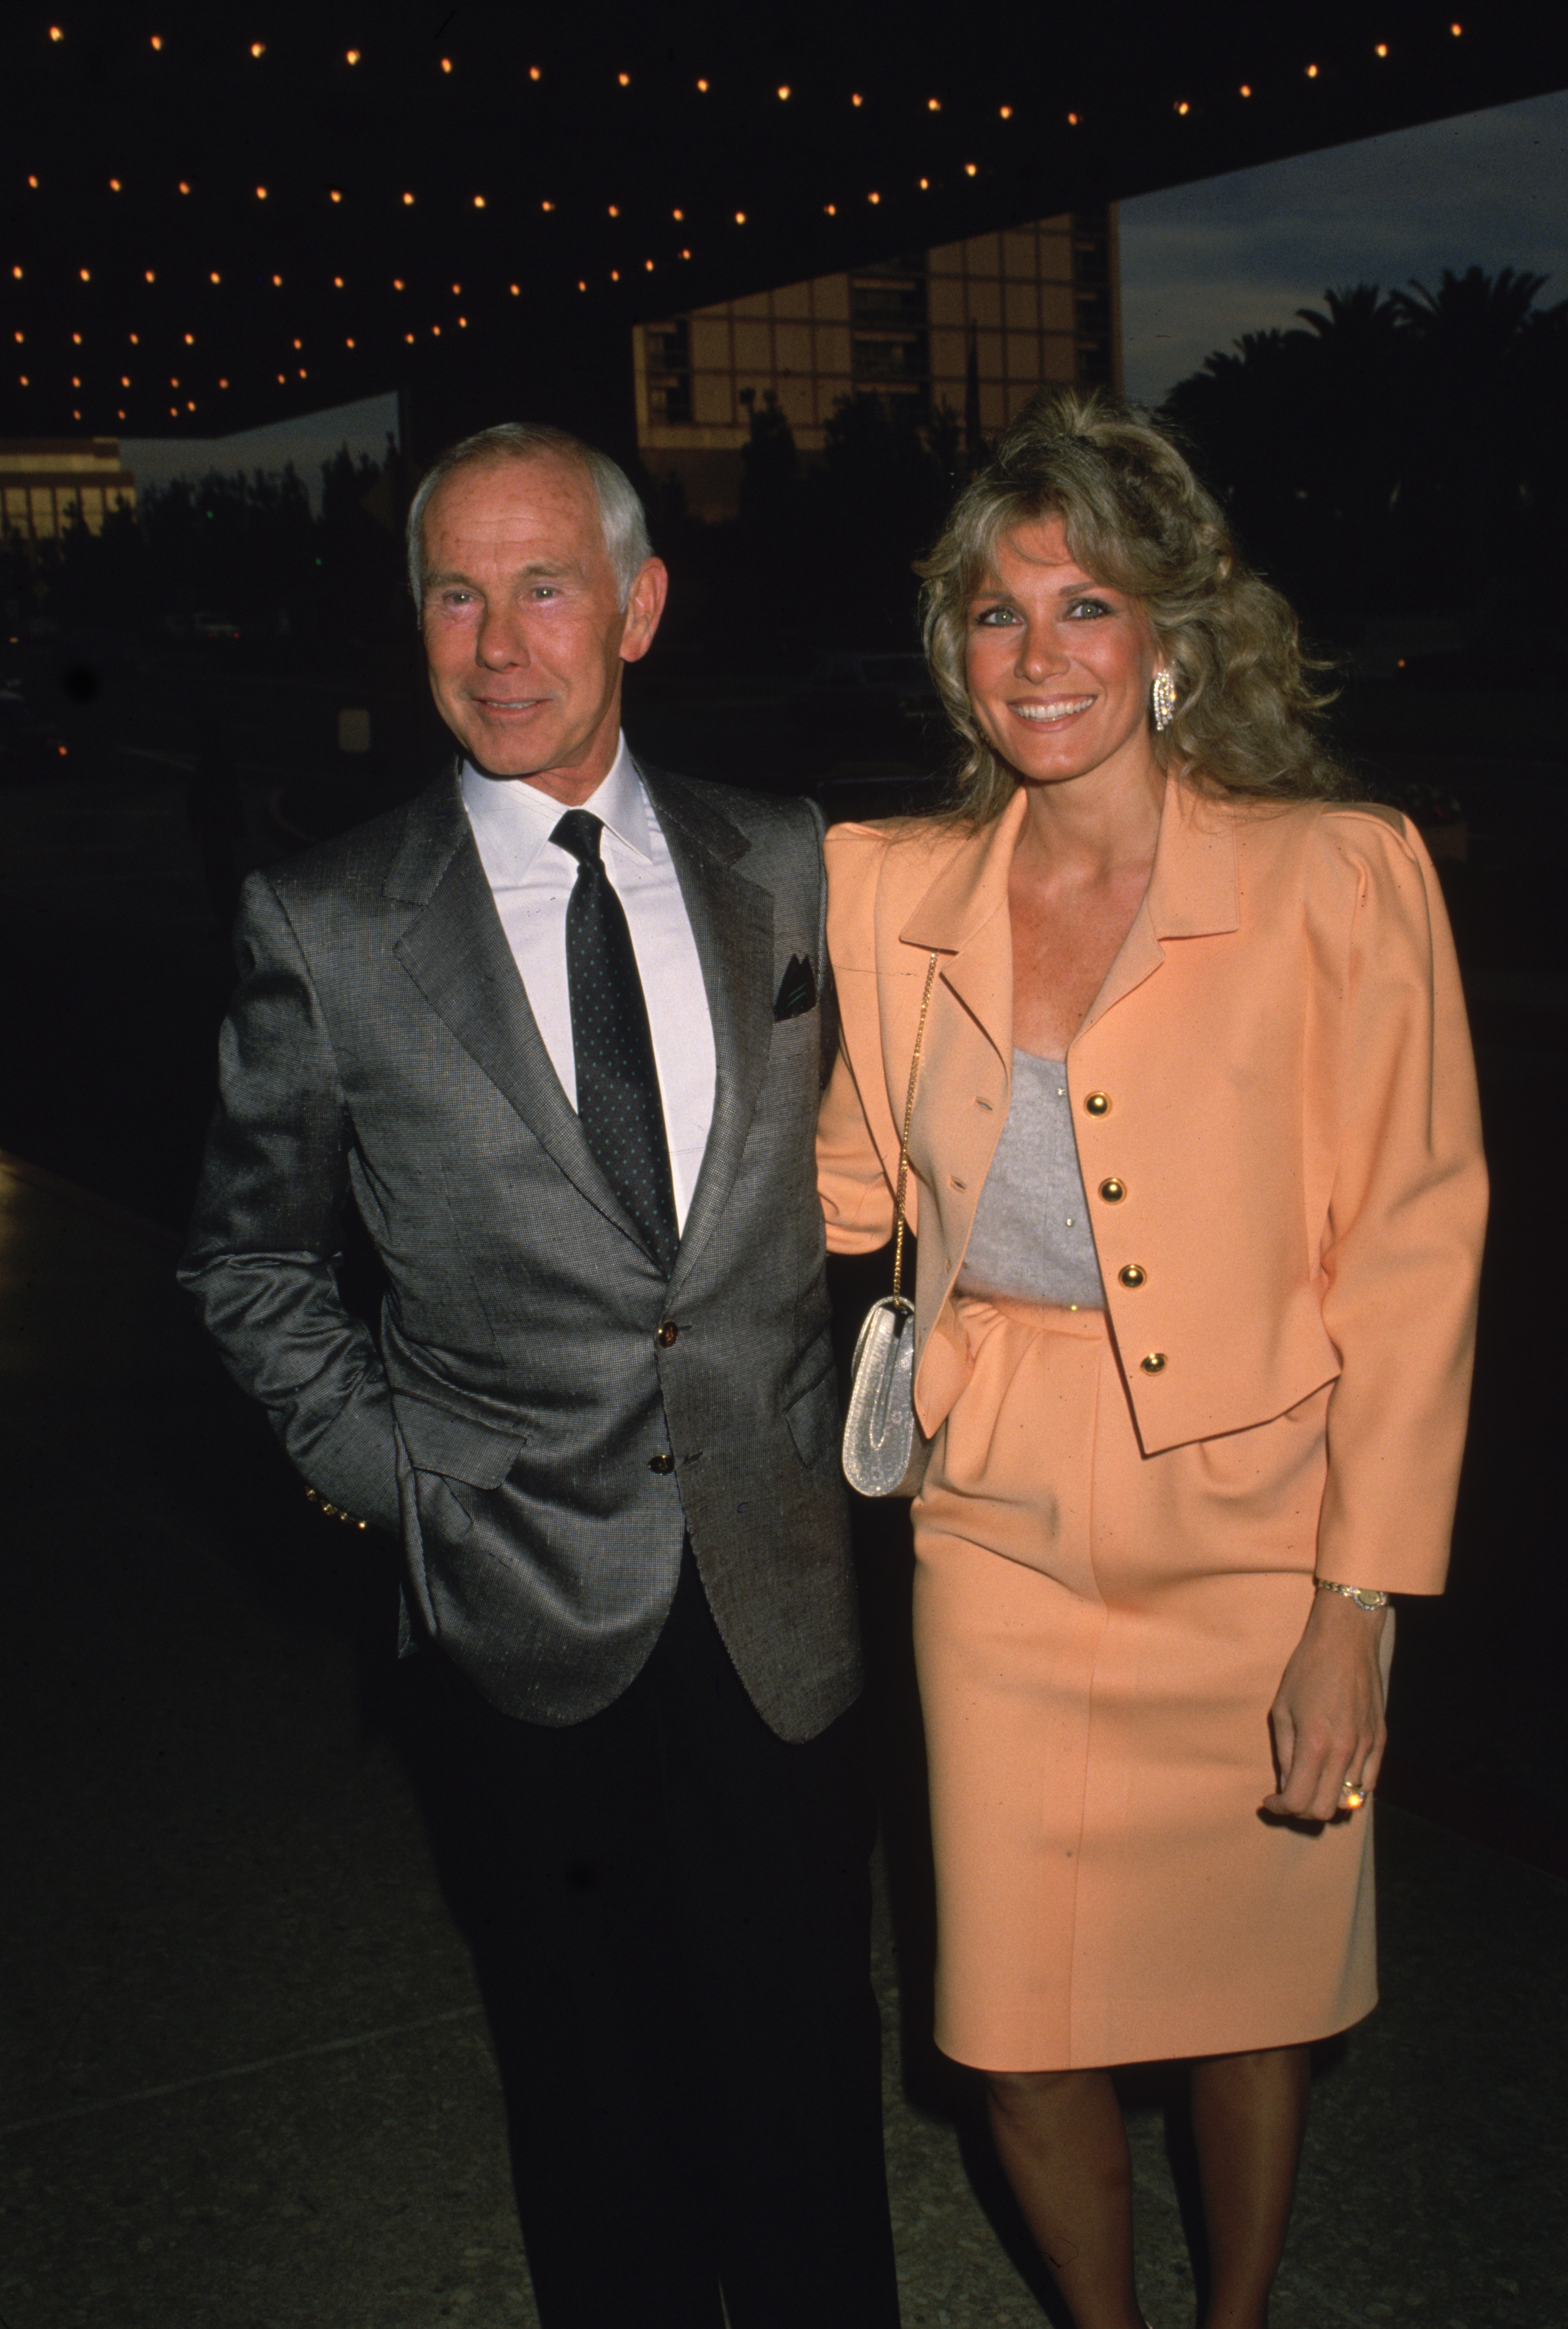 Johnny Carson and Alexis Maas at the opening of the musical "Les Miserables," in Los Angeles, California on June 1, 1988. | Source: Getty Images